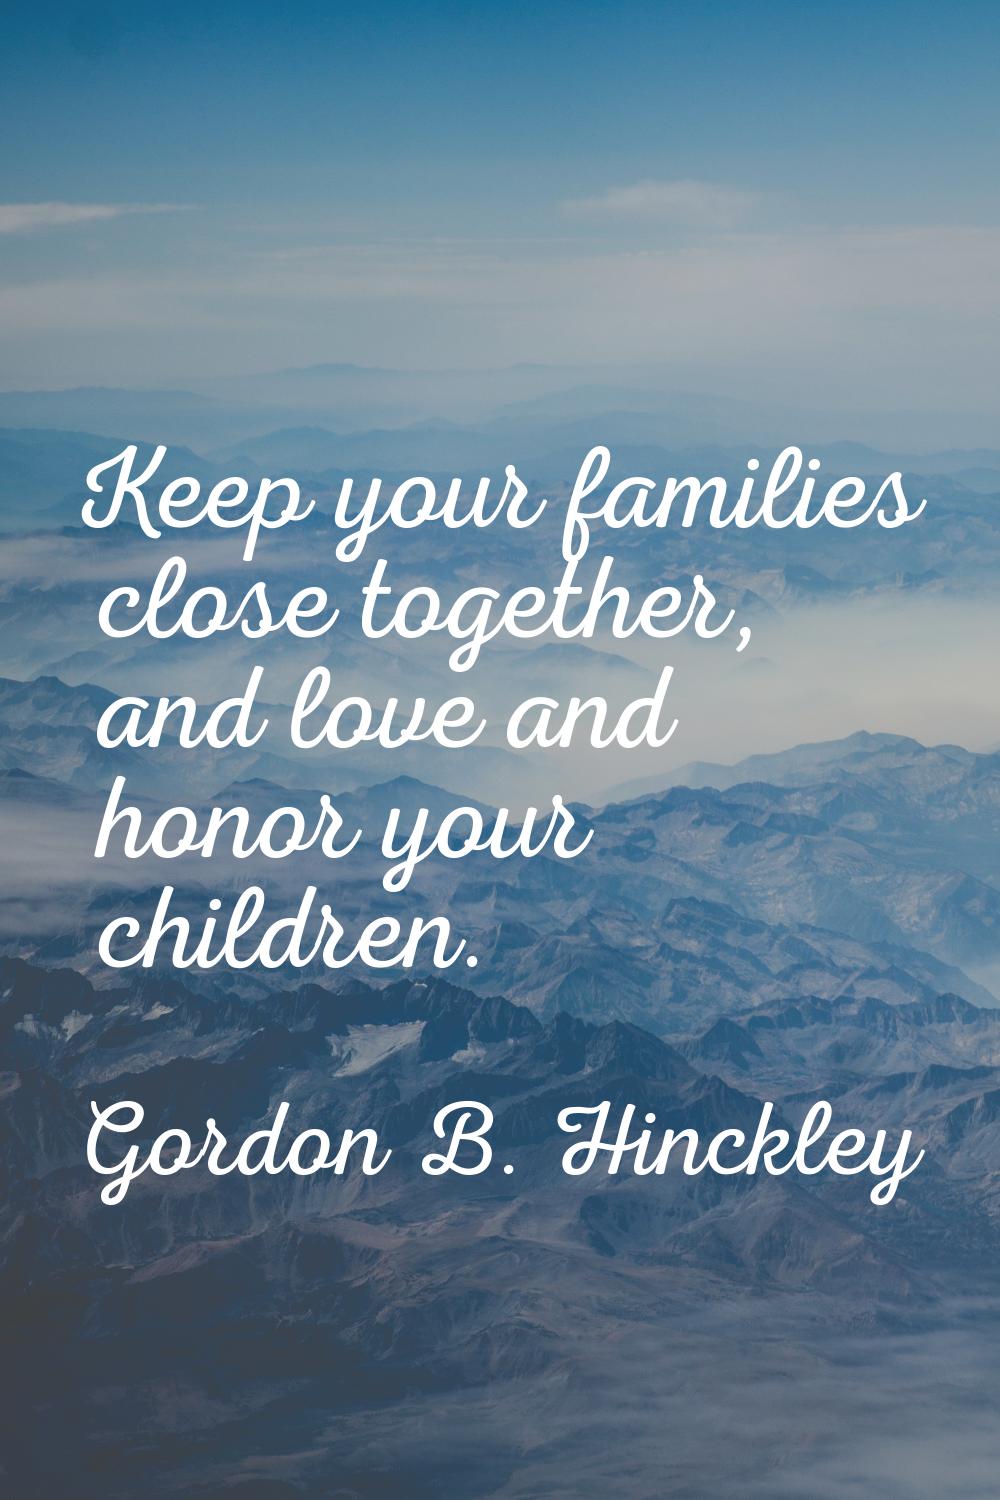 Keep your families close together, and love and honor your children.